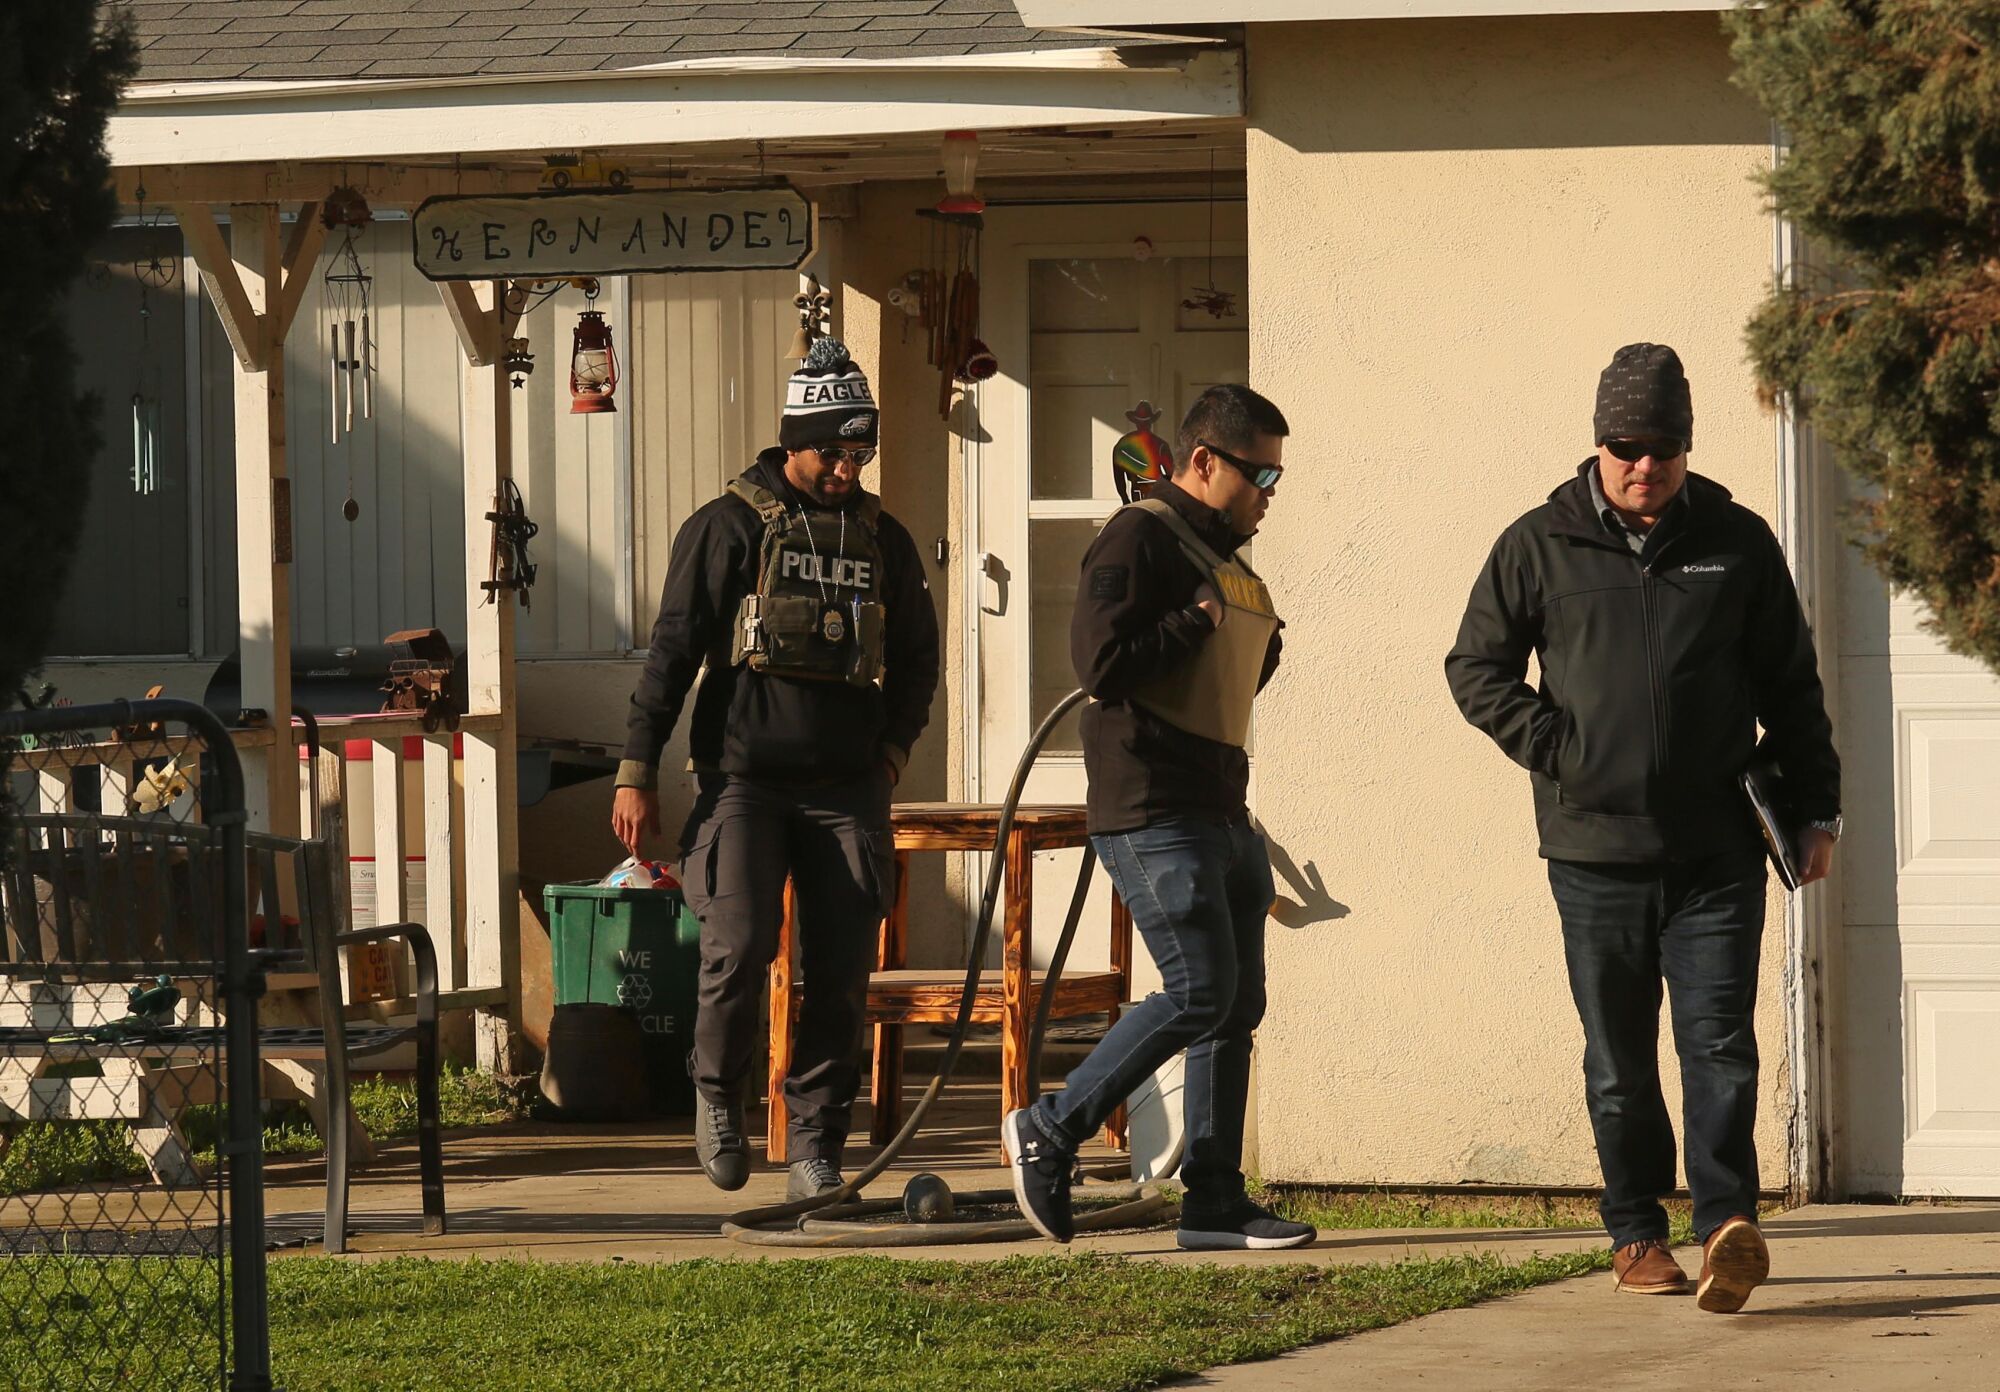 Three federal agents leaving through the driveway of a residential property